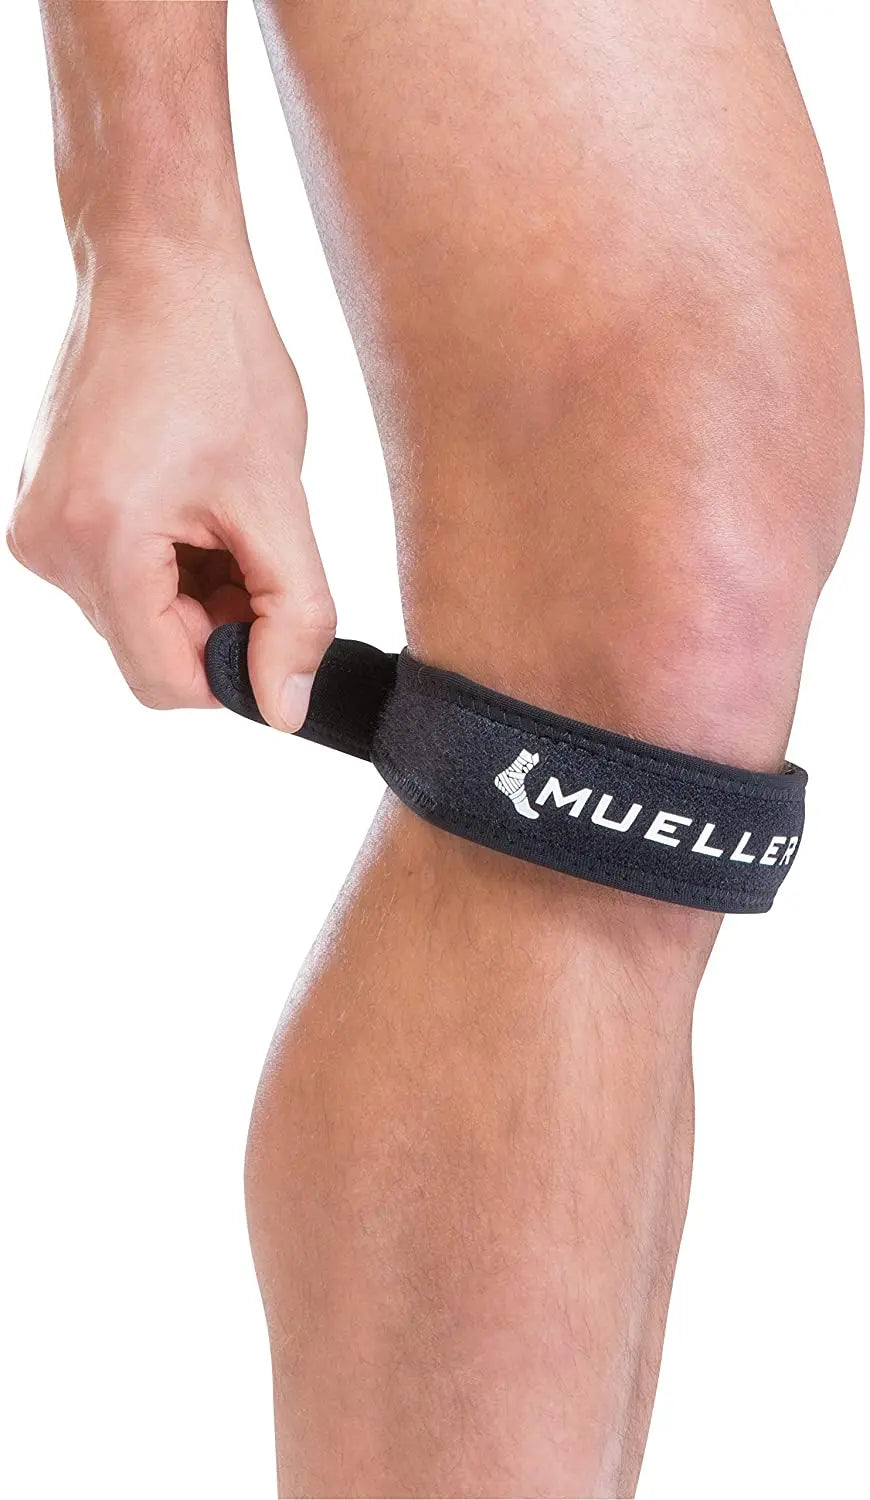 Mueller Jumper's Knee Strap, One Size Fits All